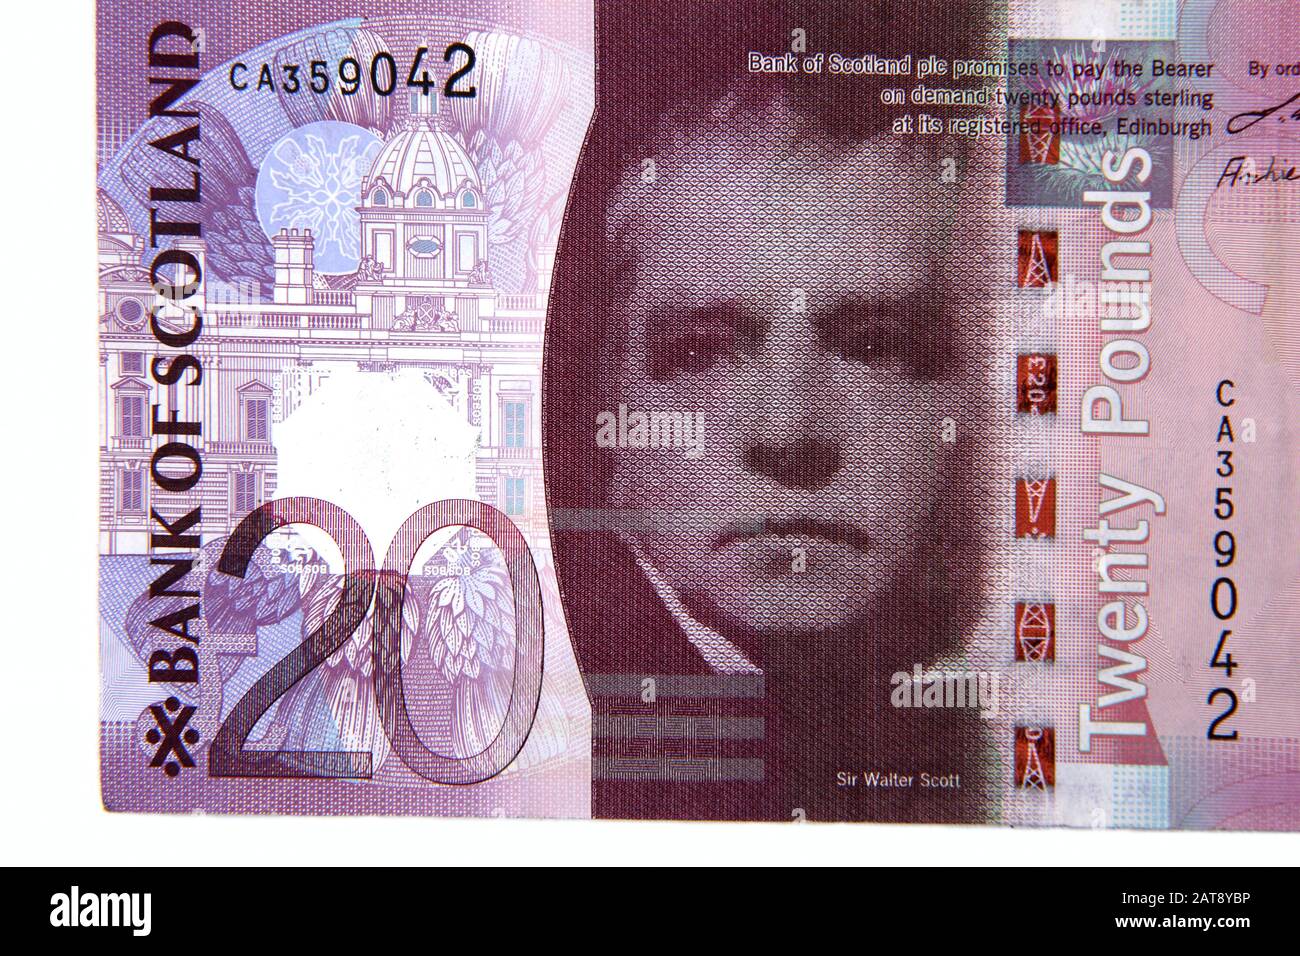 Sir Walter Scott Depicted on Obverse side of Bank of Scotland Ten Pound Note Stock Photo